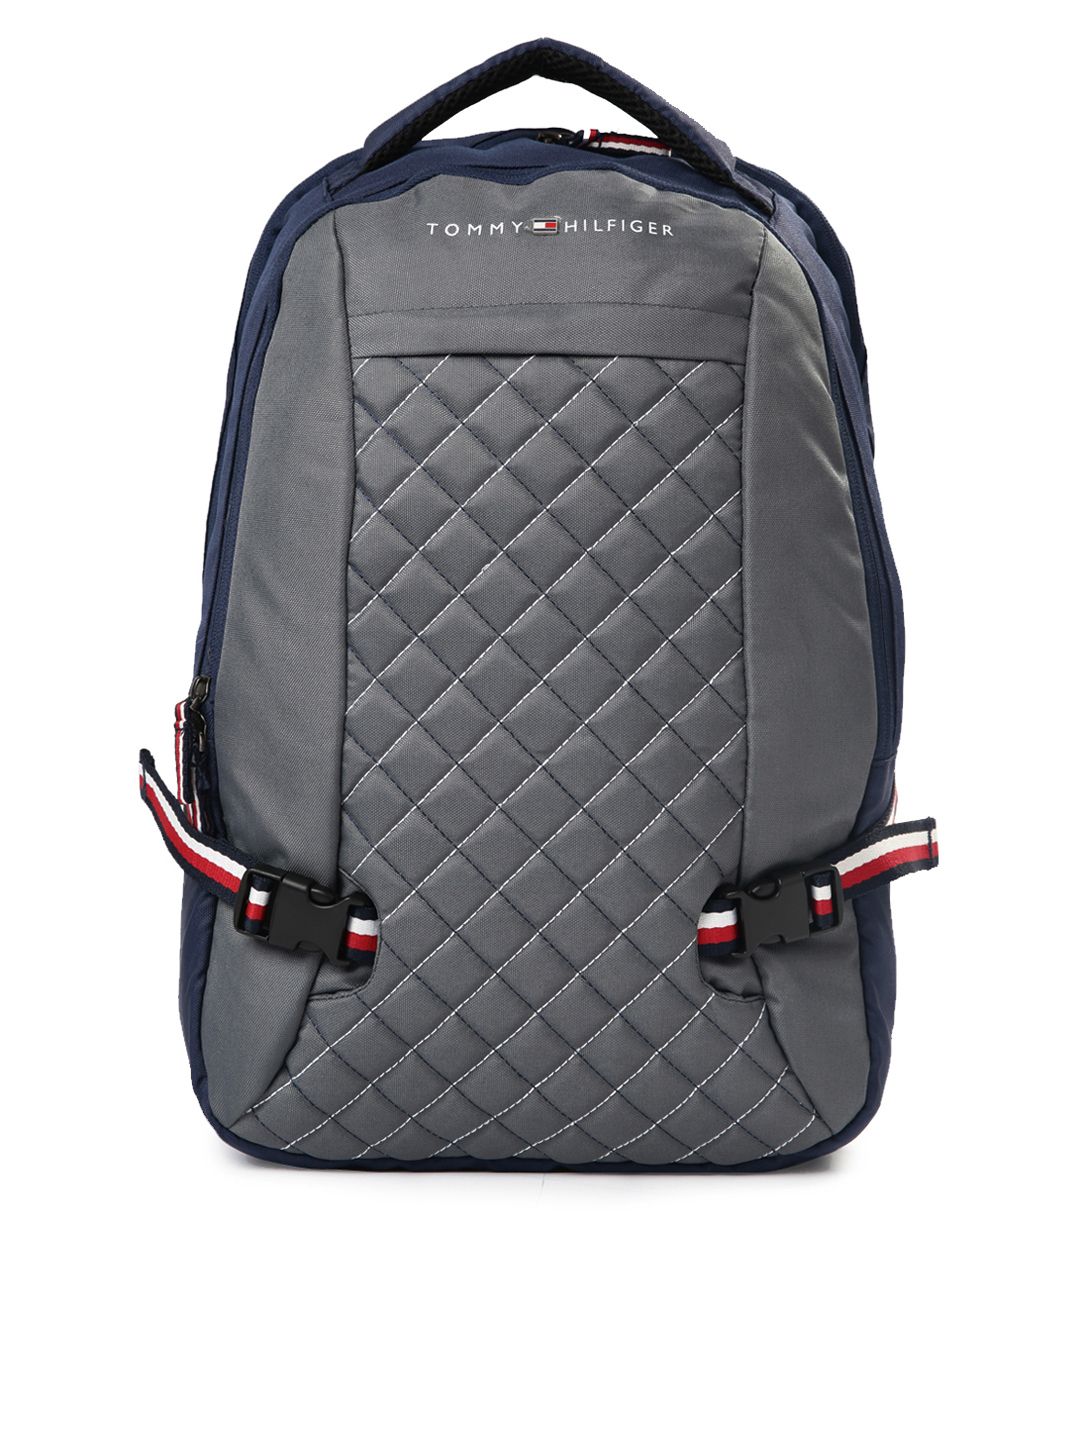 Tommy Hilfiger Unisex Navy & Grey Quilted Laptop Backpack Price in India